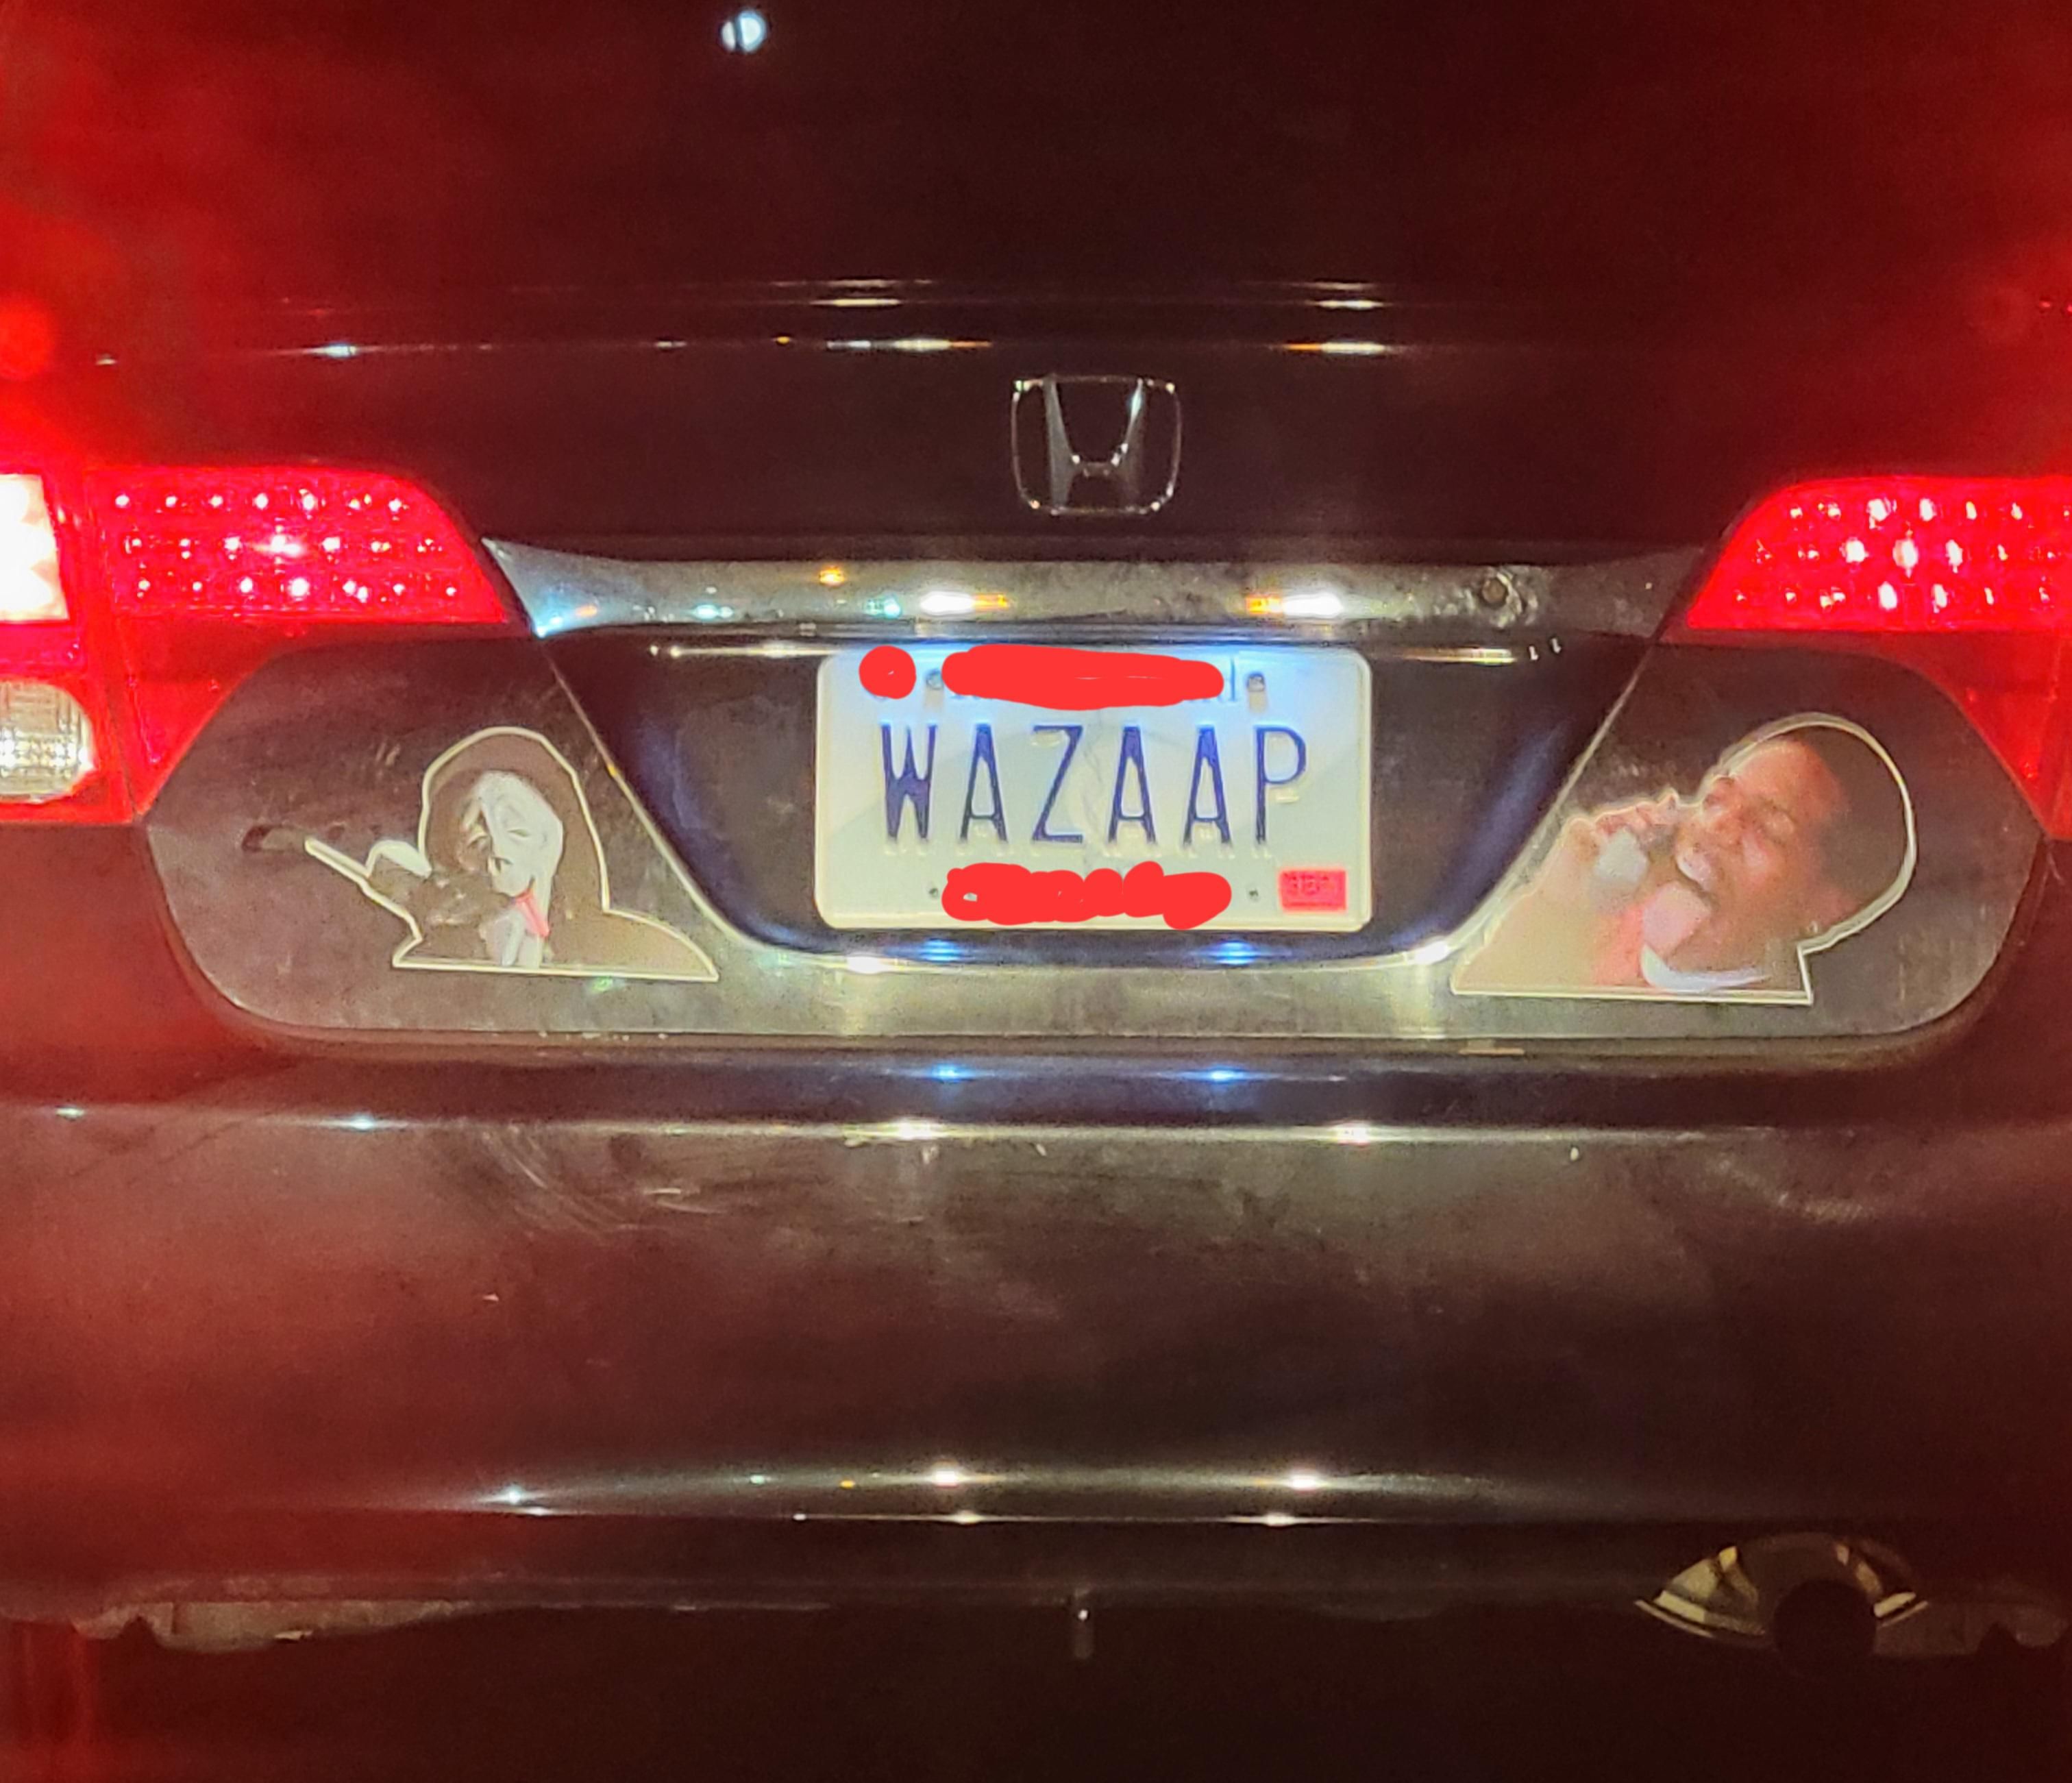 Driver in front of me today knows wazaap.